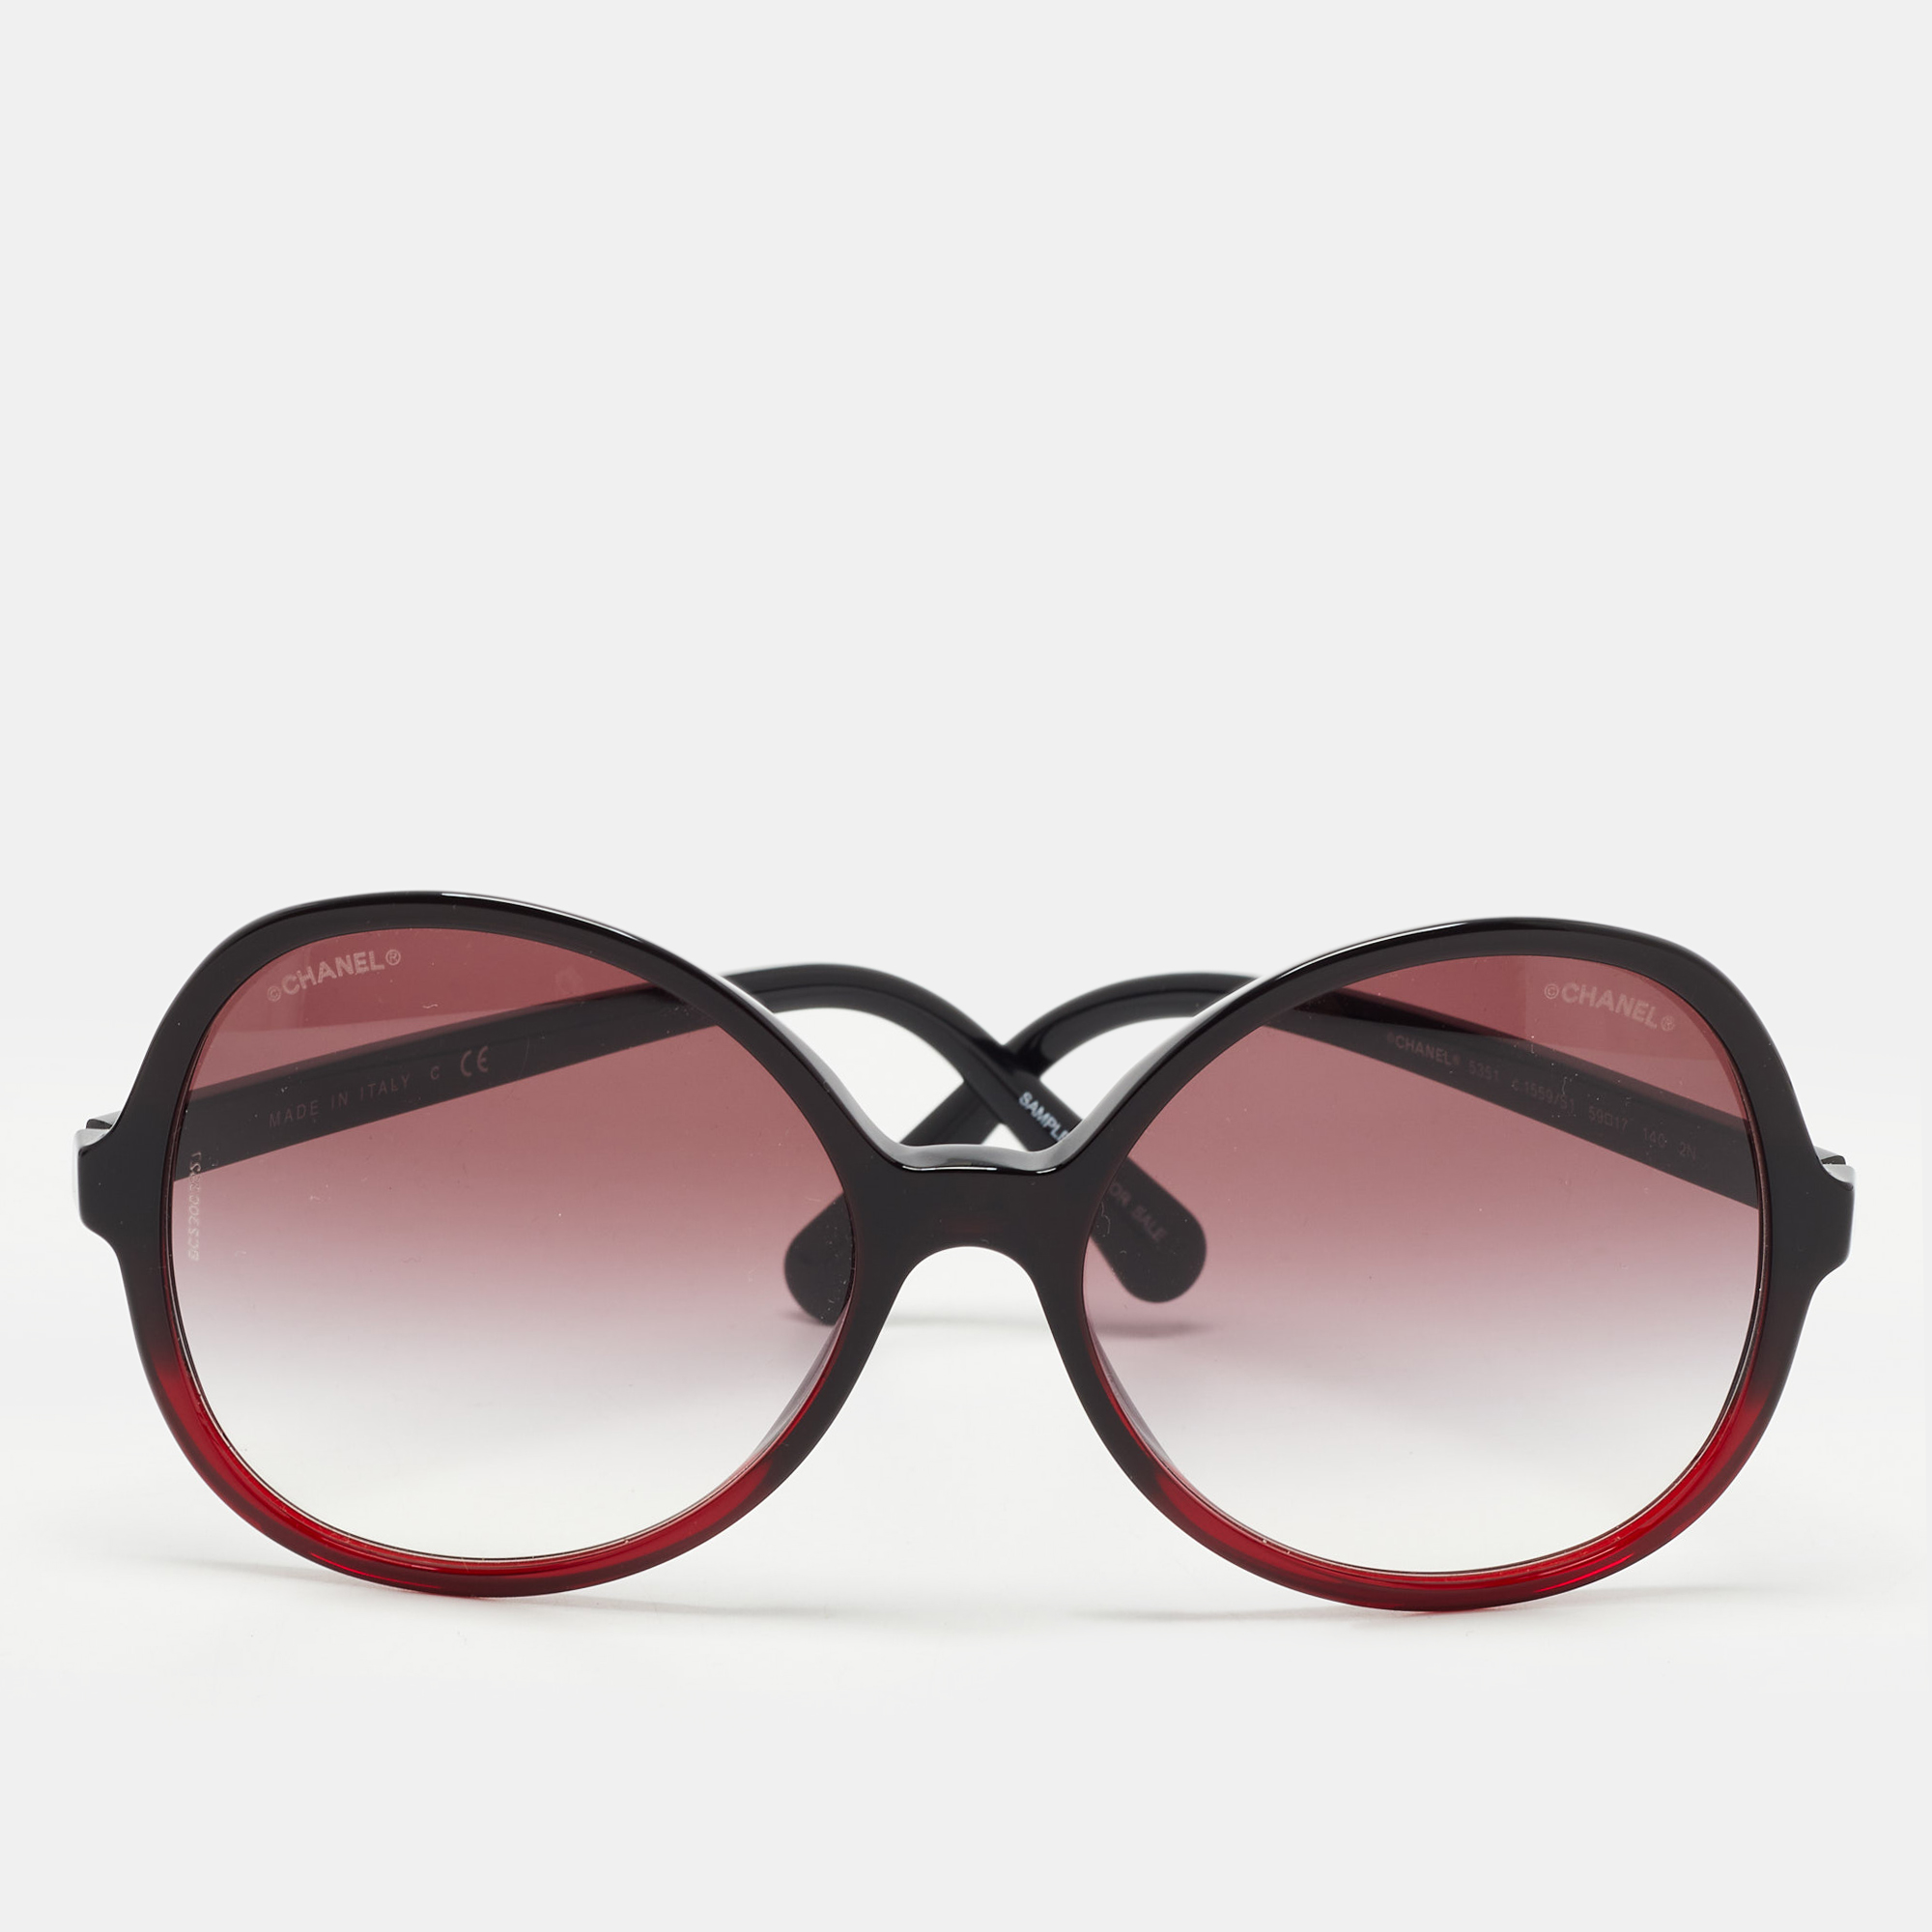 Chanel Ombre Burgundy 5351 Round Sunglasses Chanel